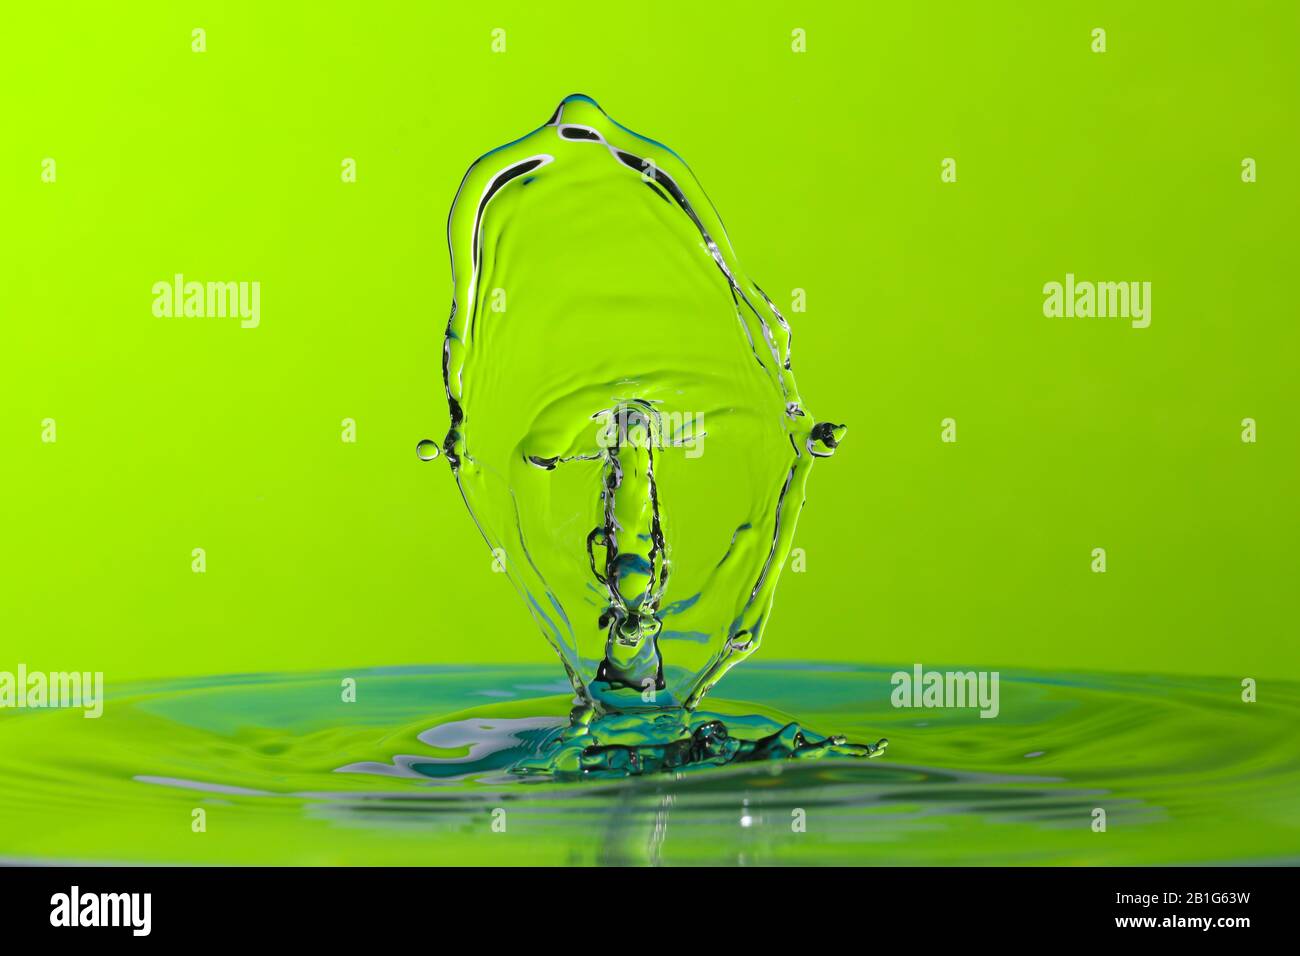 Abstract photograph of a water drop collision created with two water drops  splashing together isolated against a bright green background Stock Photo -  Alamy